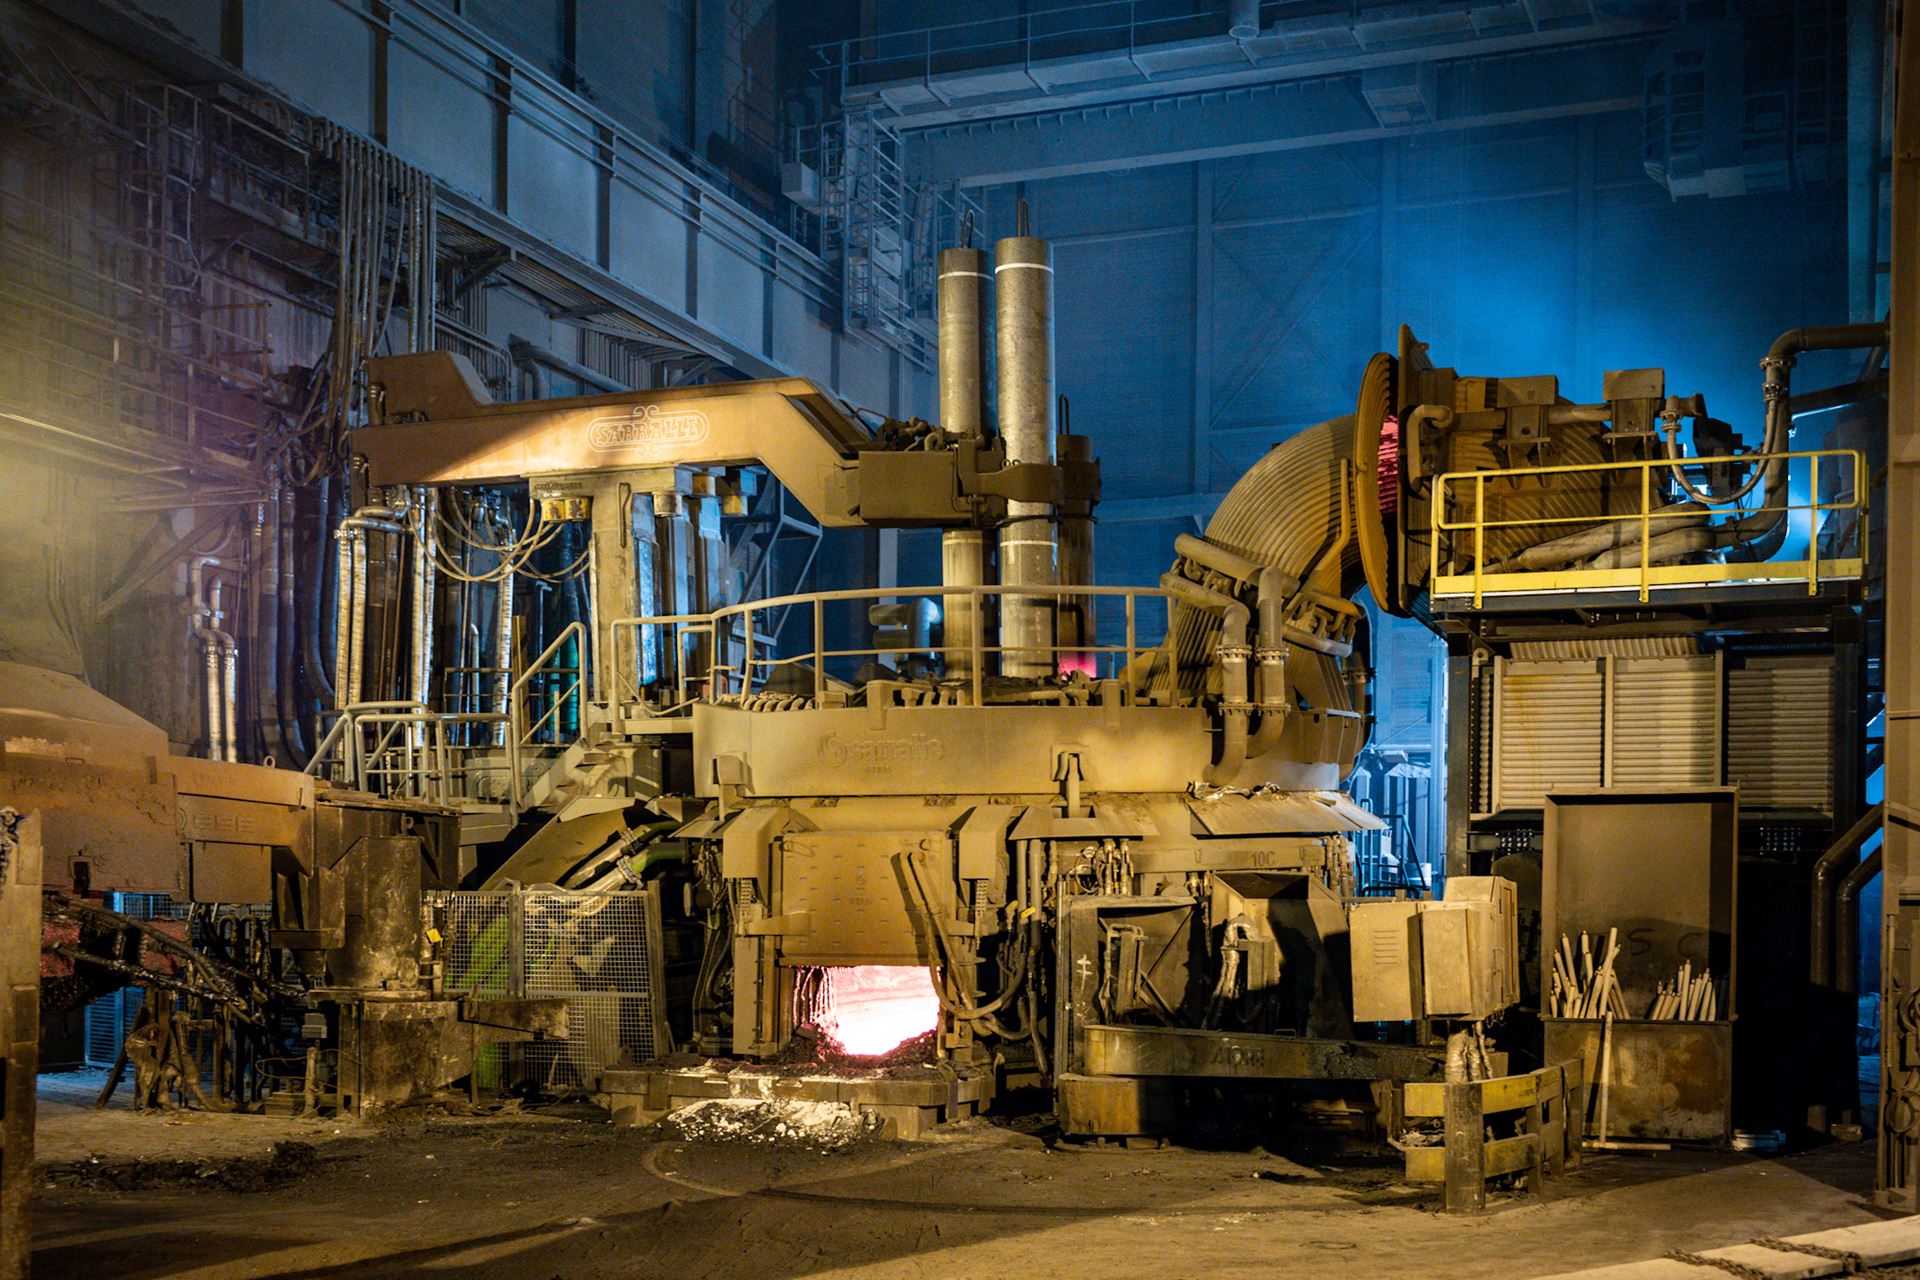 Bankruptcy decision from the major Swedish iron and steel company